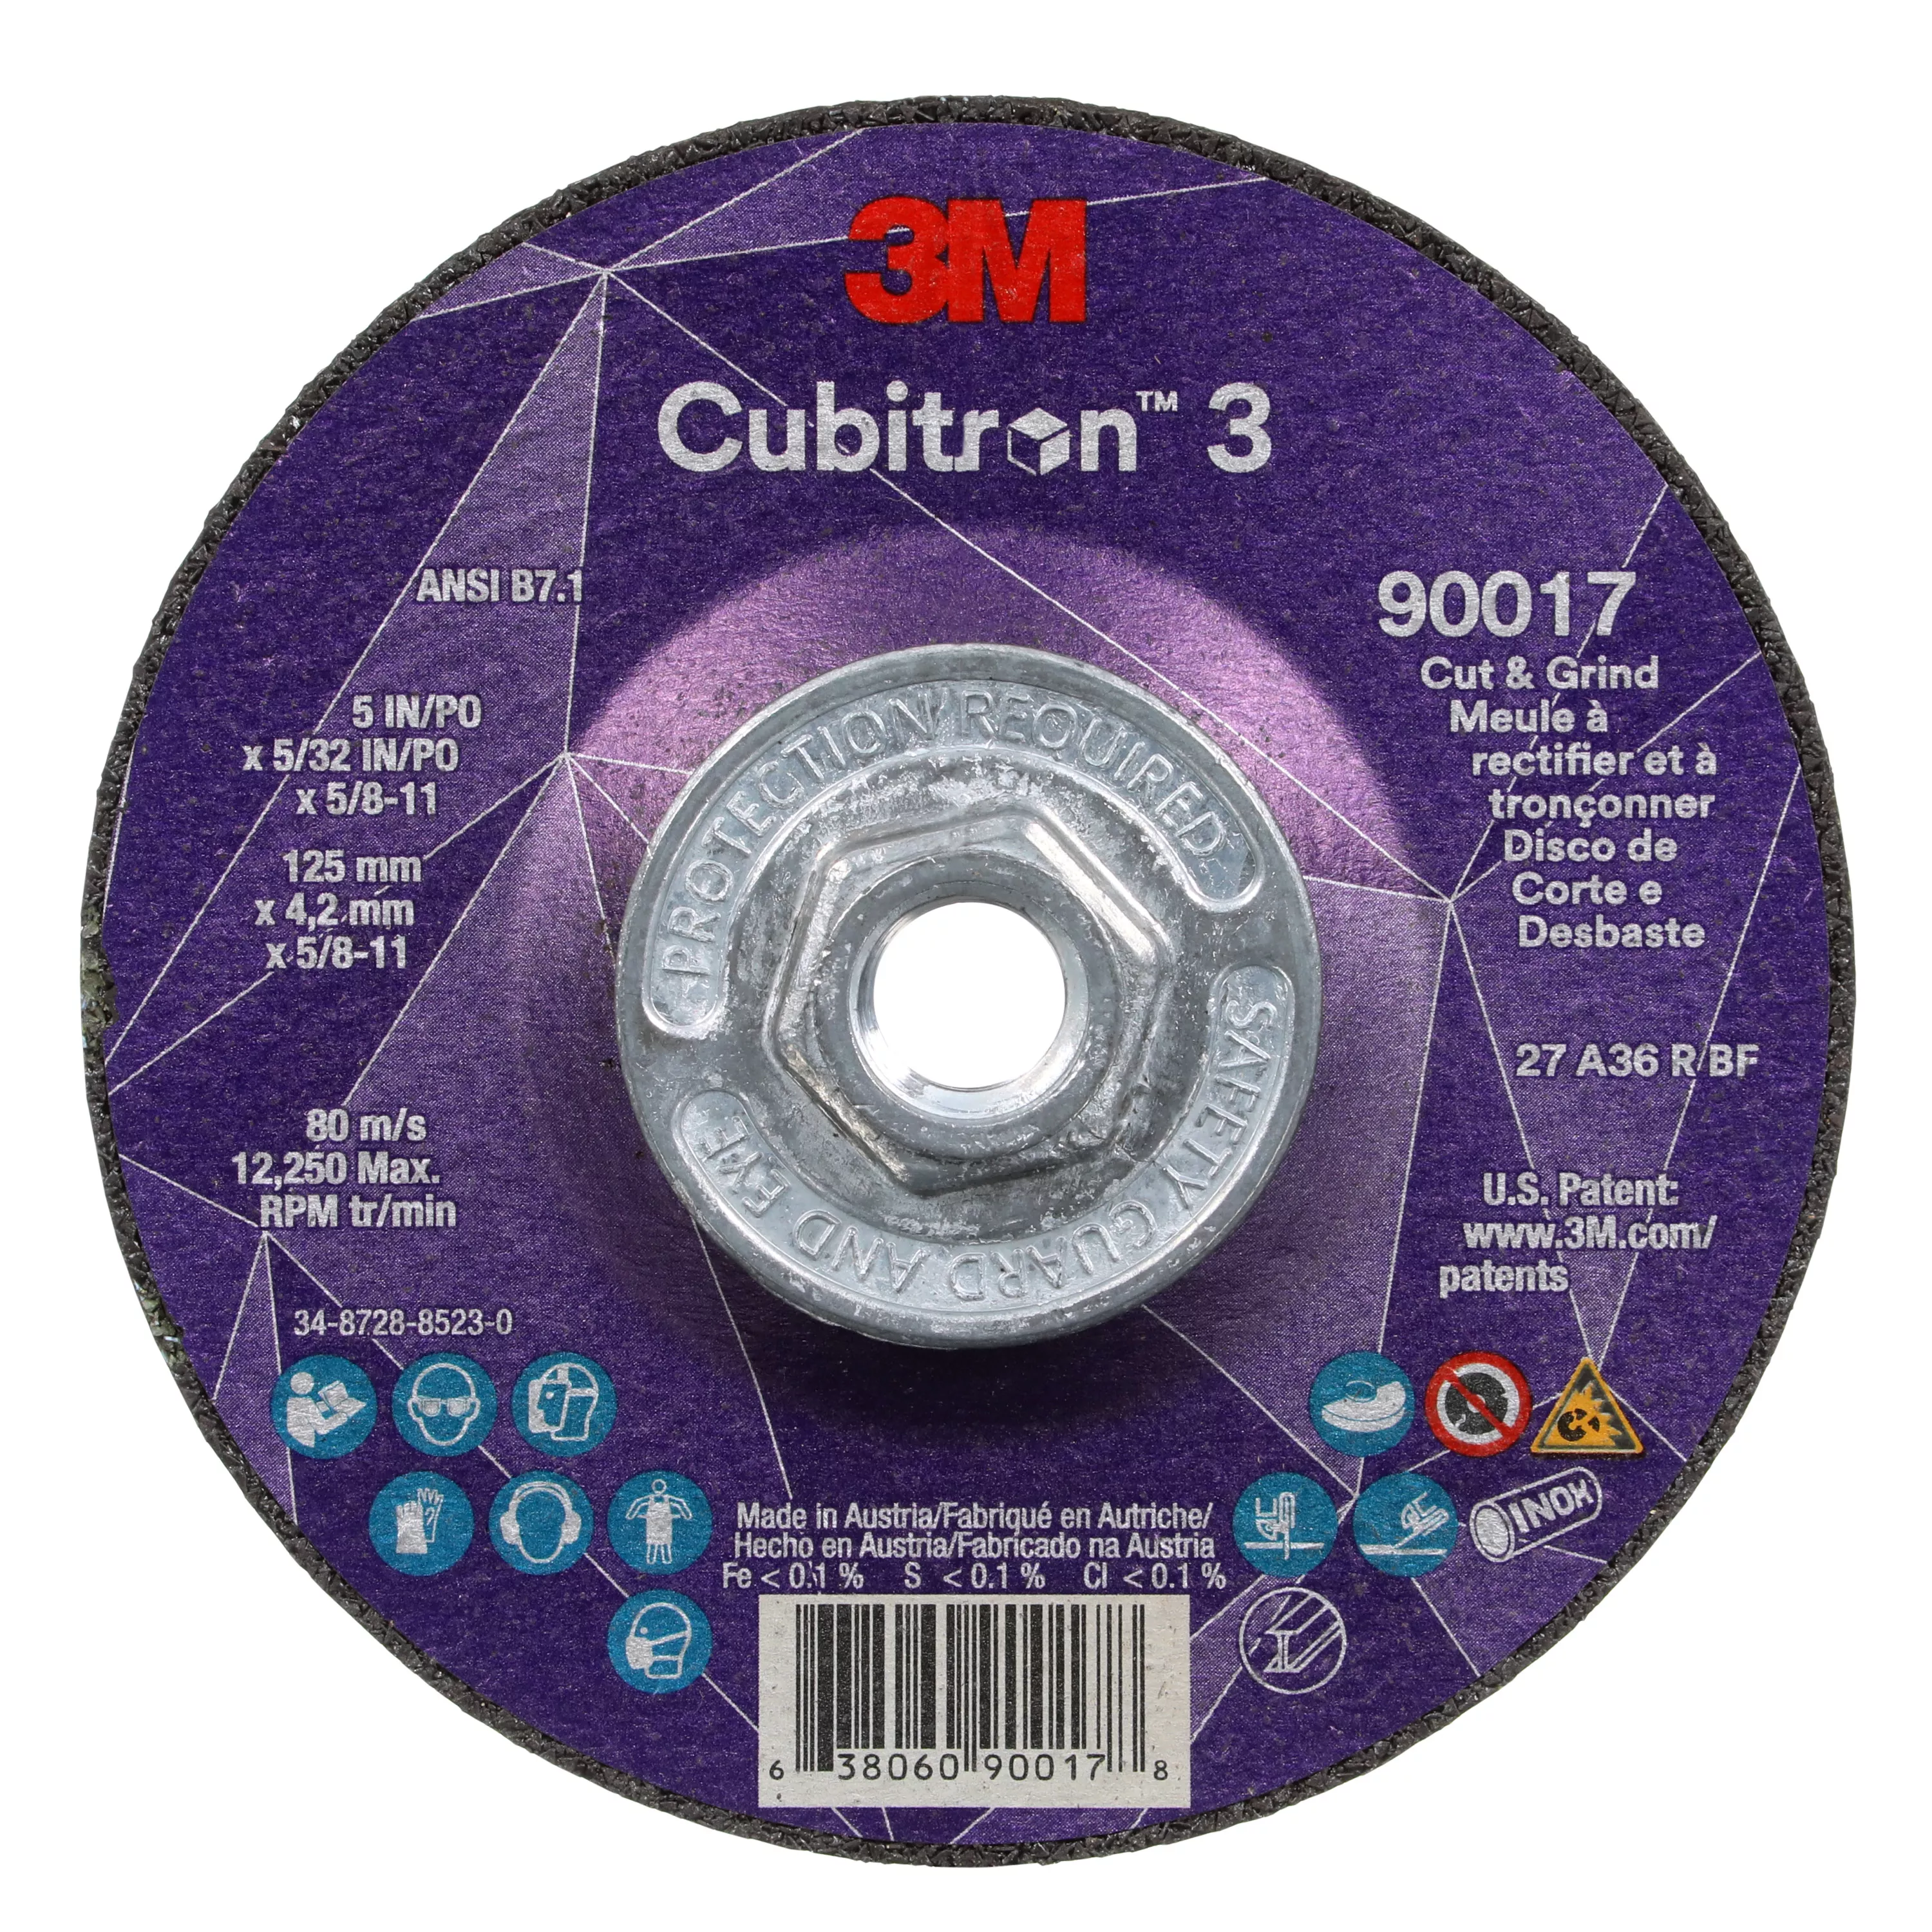 3M™ Cubitron™ 3 Cut and Grind Wheel, 90017, 36+, T27, 5 in x 5/32 in x
5/8 in-11 (125 x 4.2 mm x 5/8-11 in), ANSI, 10 ea/Case